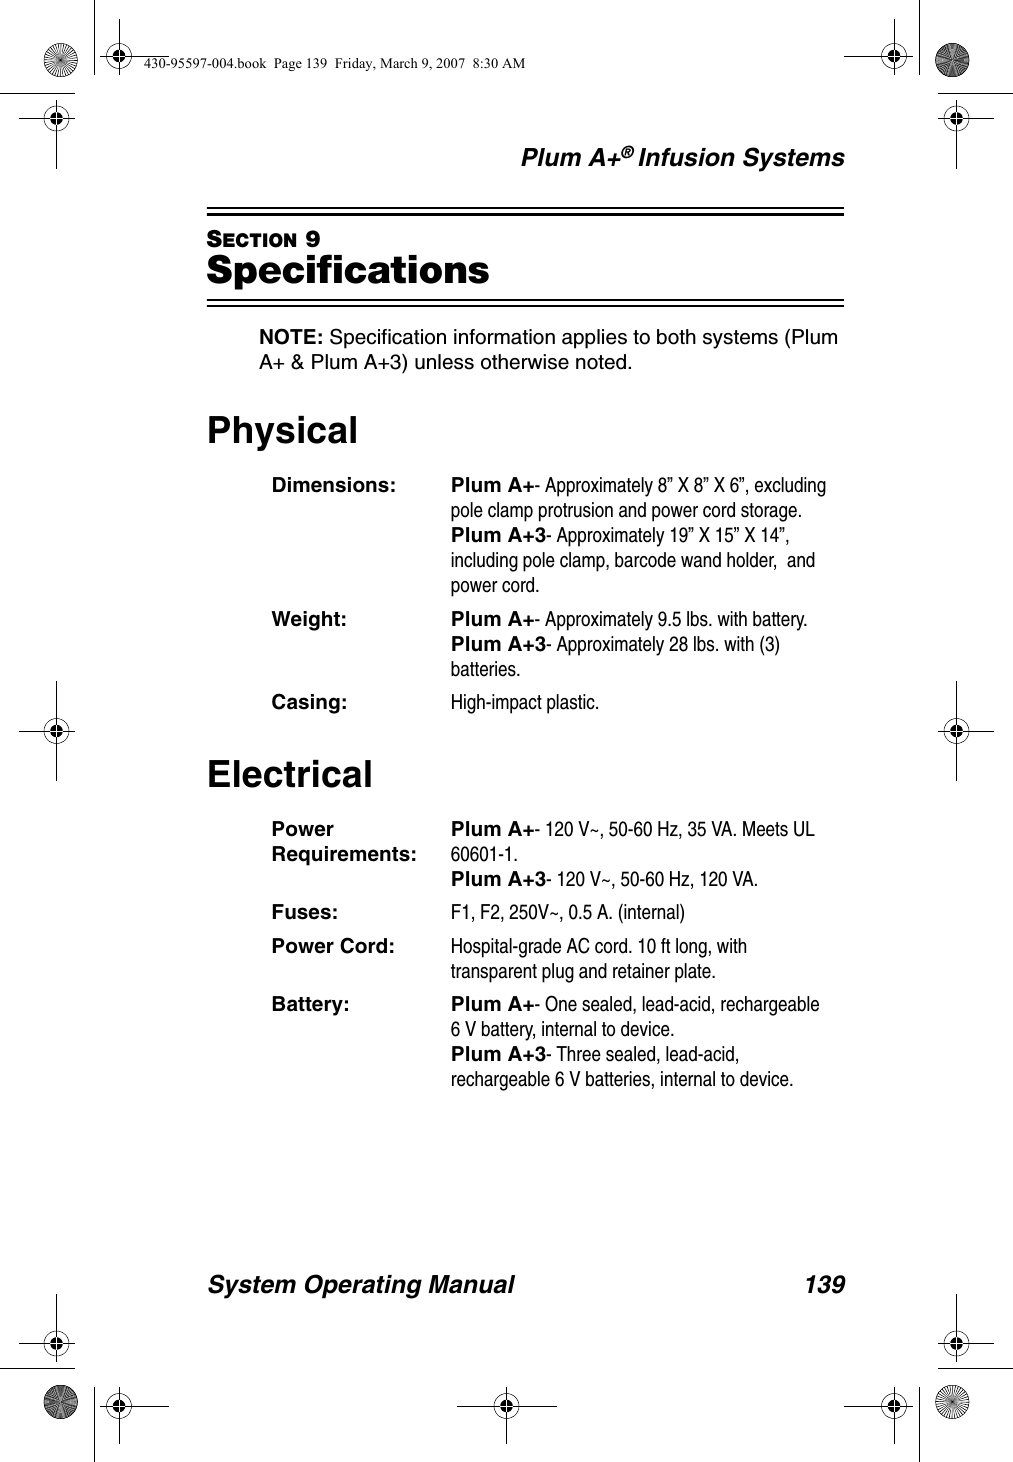 Plum A+® Infusion SystemsSystem Operating Manual 139SECTION 9SpecificationsNOTE: Specification information applies to both systems (Plum A+ &amp; Plum A+3) unless otherwise noted.PhysicalElectricalDimensions: Plum A+- Approximately 8” X 8” X 6”, excluding pole clamp protrusion and power cord storage.Plum A+3- Approximately 19” X 15” X 14”, including pole clamp, barcode wand holder,  and power cord.Weight: Plum A+- Approximately 9.5 lbs. with battery.Plum A+3- Approximately 28 lbs. with (3) batteries.Casing: High-impact plastic.Power Requirements:Plum A+- 120 V~, 50-60 Hz, 35 VA. Meets UL 60601-1.Plum A+3- 120 V~, 50-60 Hz, 120 VA.Fuses: F1, F2, 250V~, 0.5 A. (internal)Power Cord: Hospital-grade AC cord. 10 ft long, with transparent plug and retainer plate.Battery: Plum A+- One sealed, lead-acid, rechargeable 6 V battery, internal to device.Plum A+3- Three sealed, lead-acid, rechargeable 6 V batteries, internal to device.430-95597-004.book  Page 139  Friday, March 9, 2007  8:30 AM